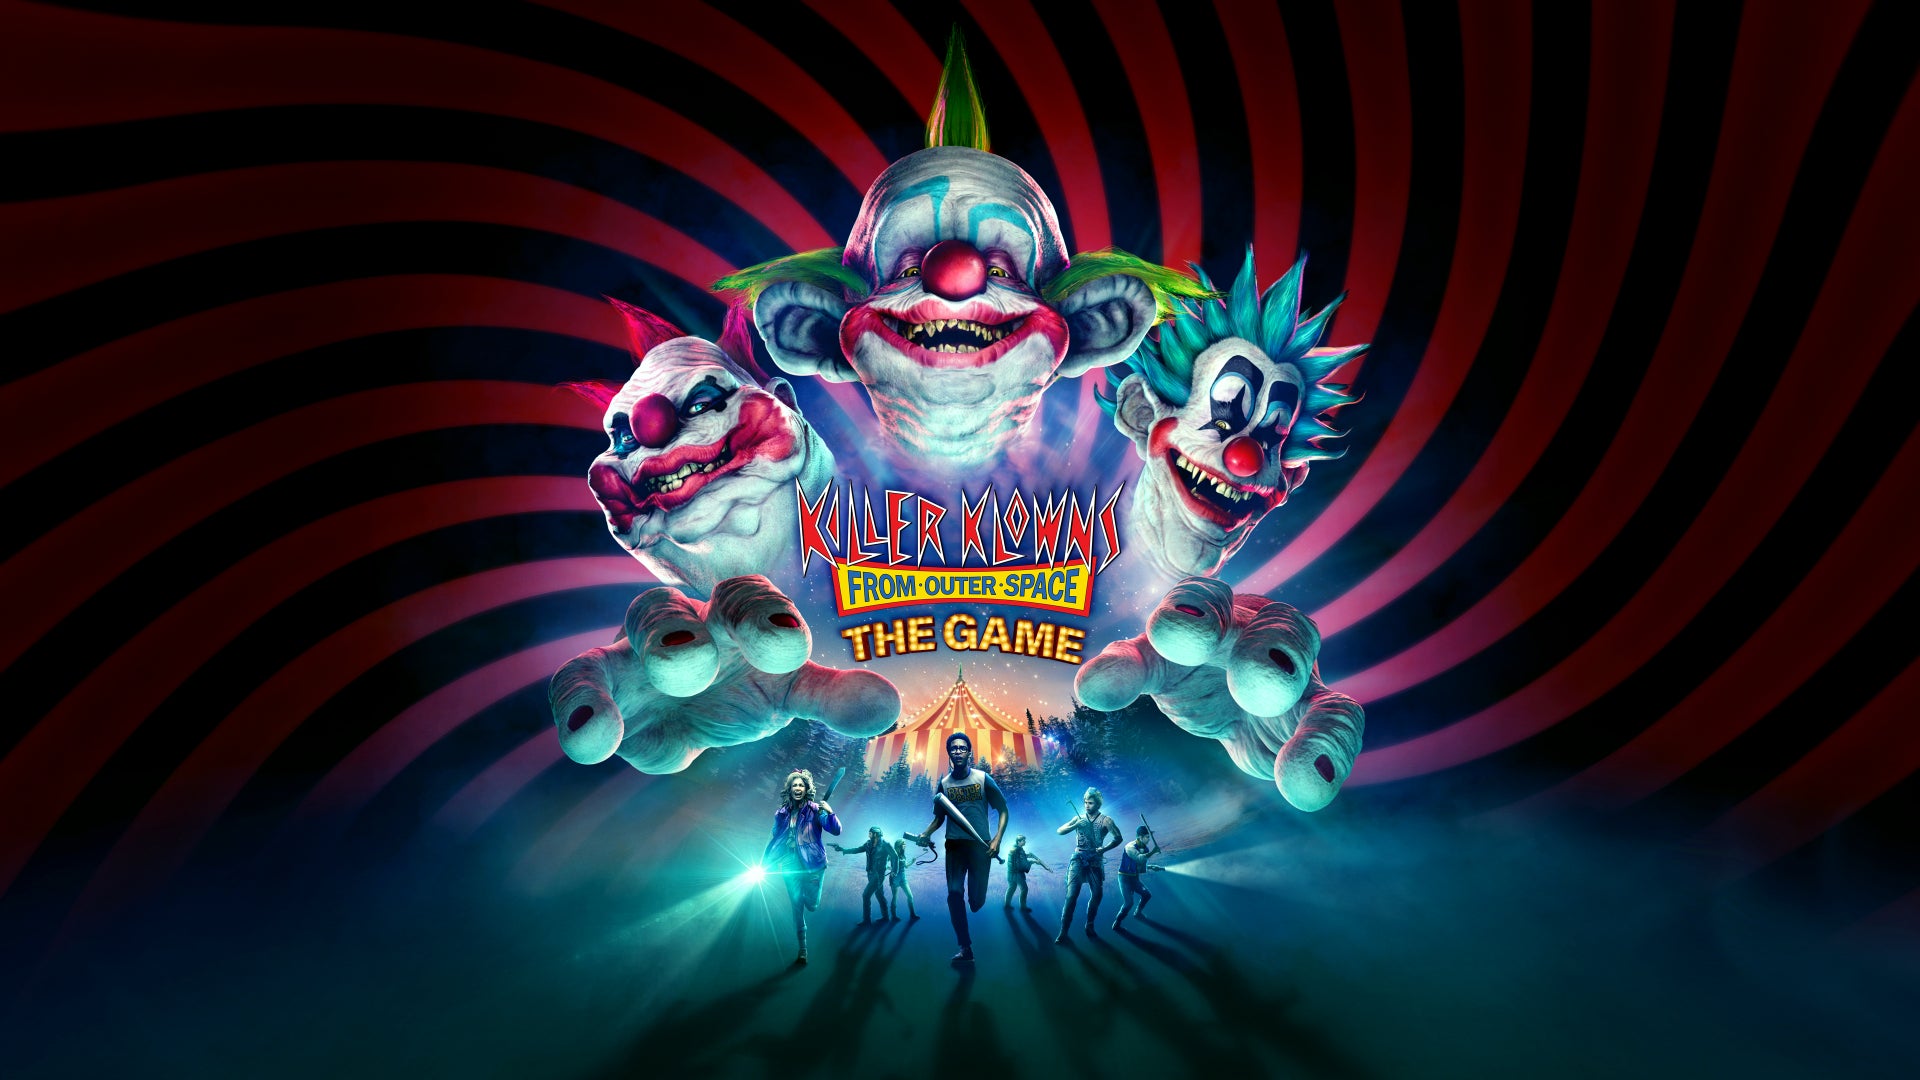 Key art for Killer Klowns from Outer Space: The Game